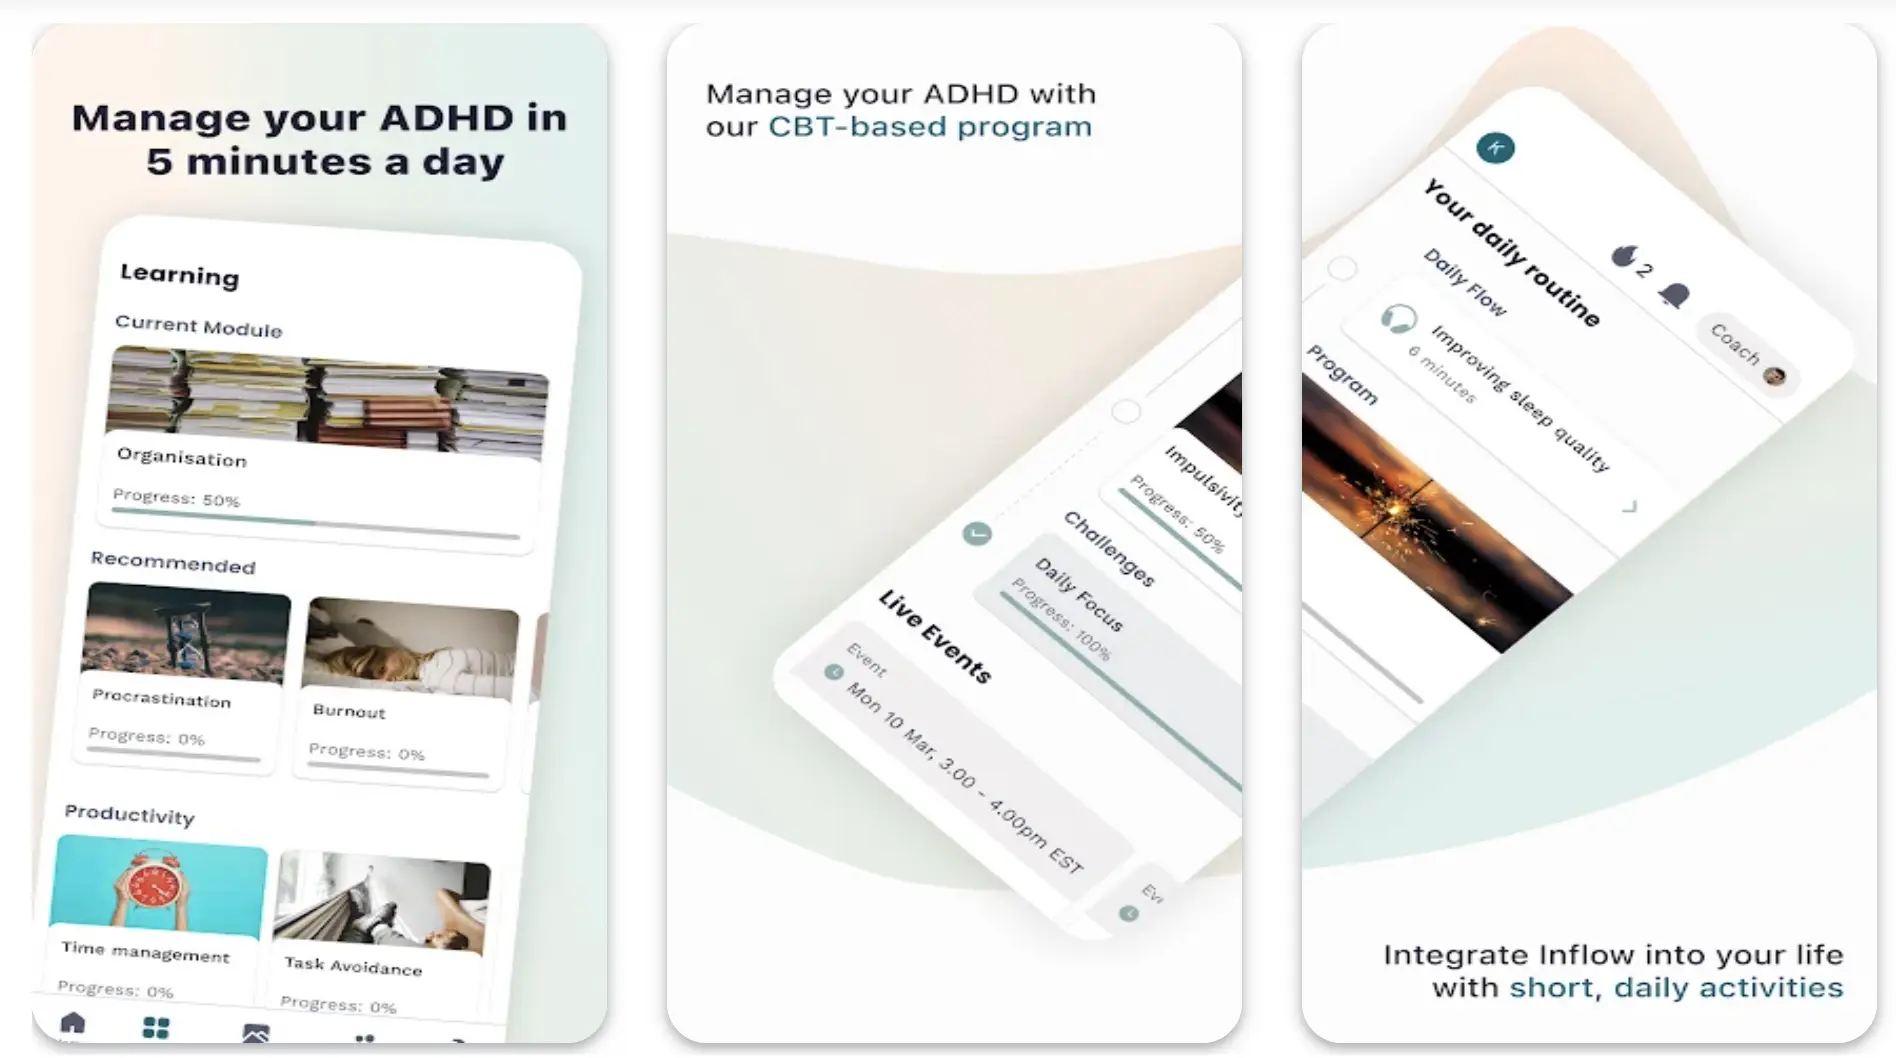 11 Best ADHD Apps To Manage Your ADHD